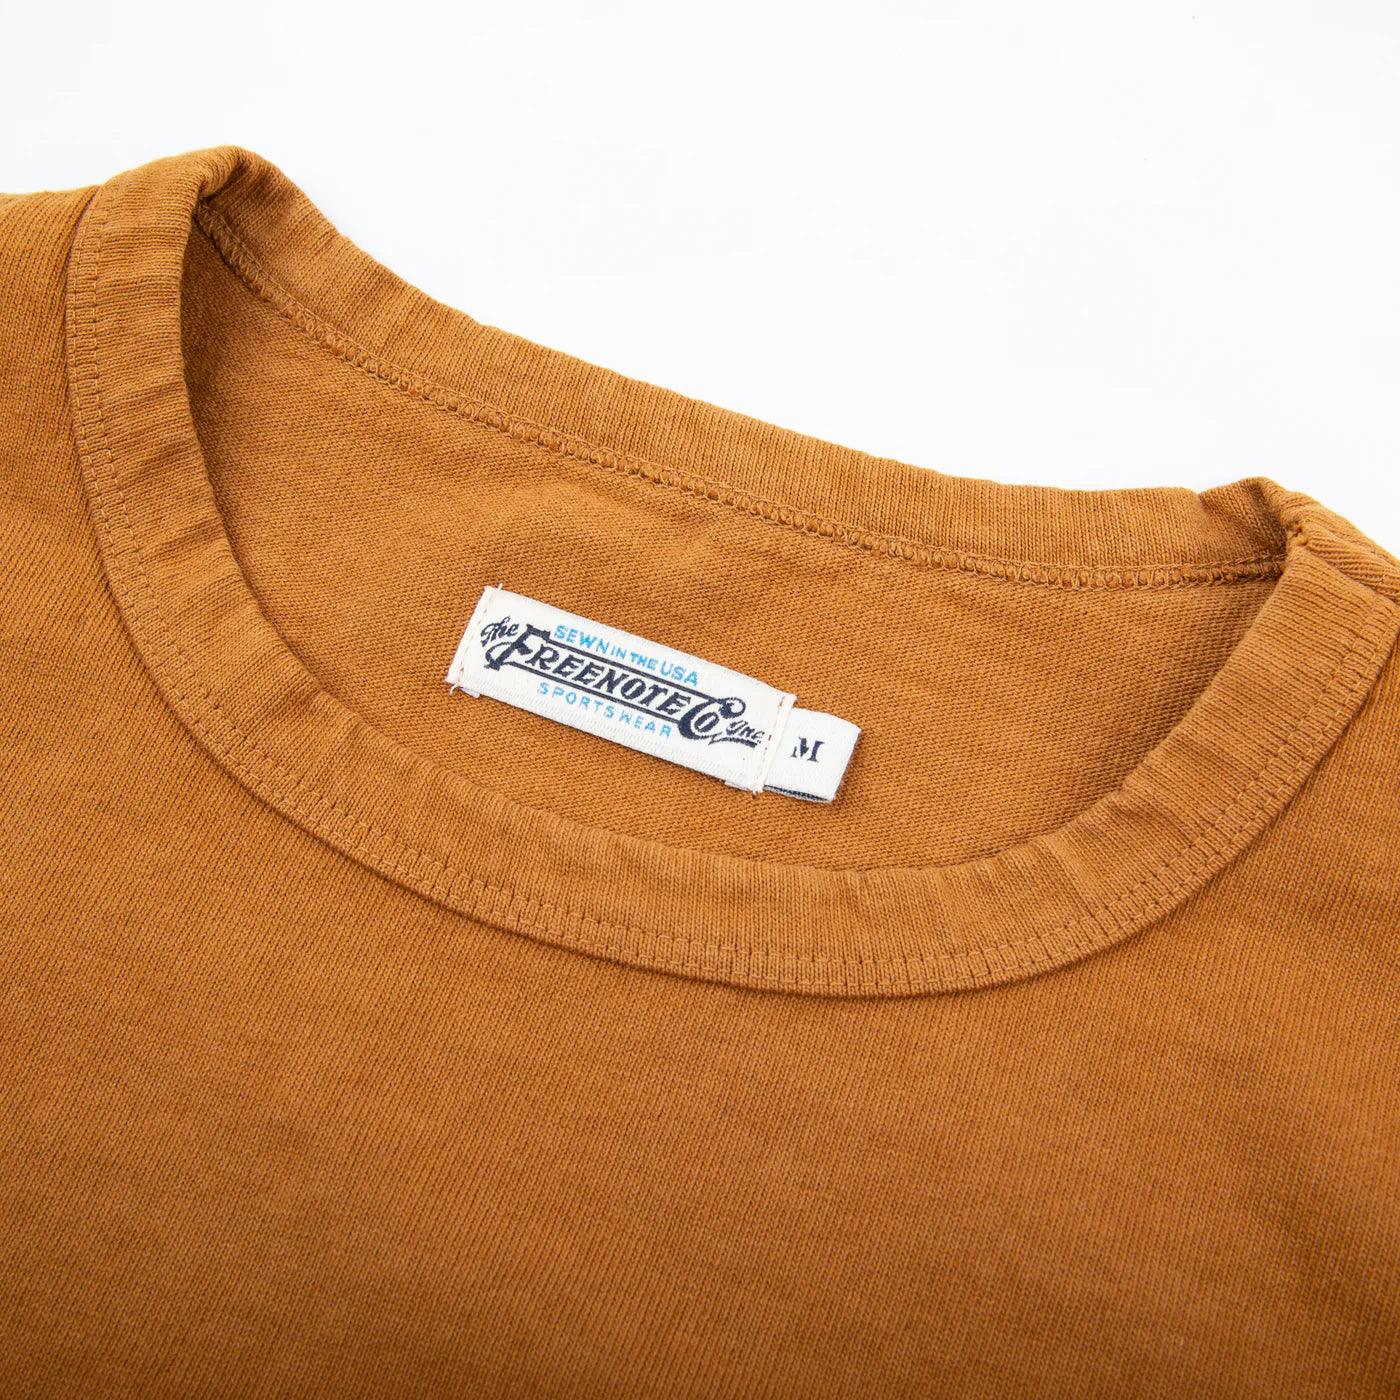 Freenote Cloth Heavyweight 13oz Pocket Tee - Tobacco - Guilty Party